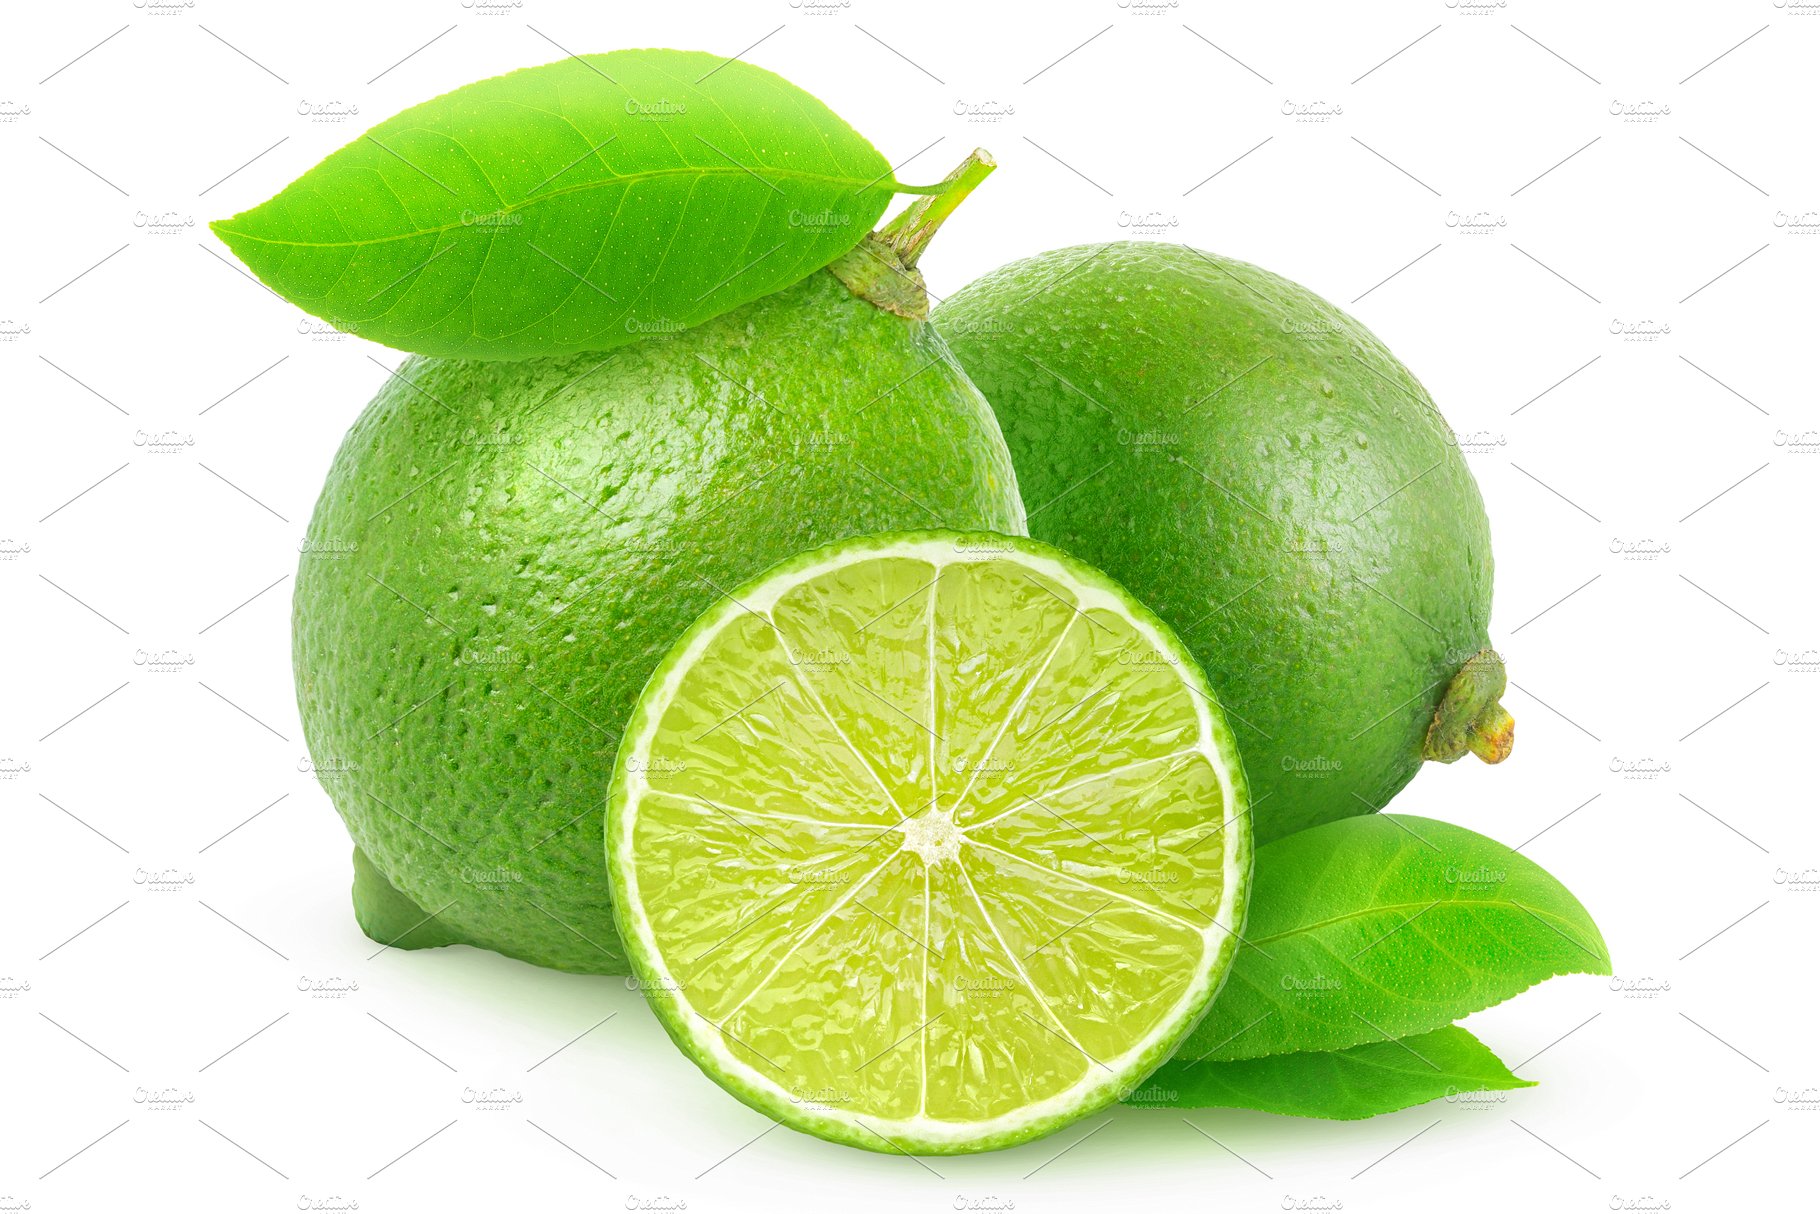 Cut limes cover image.